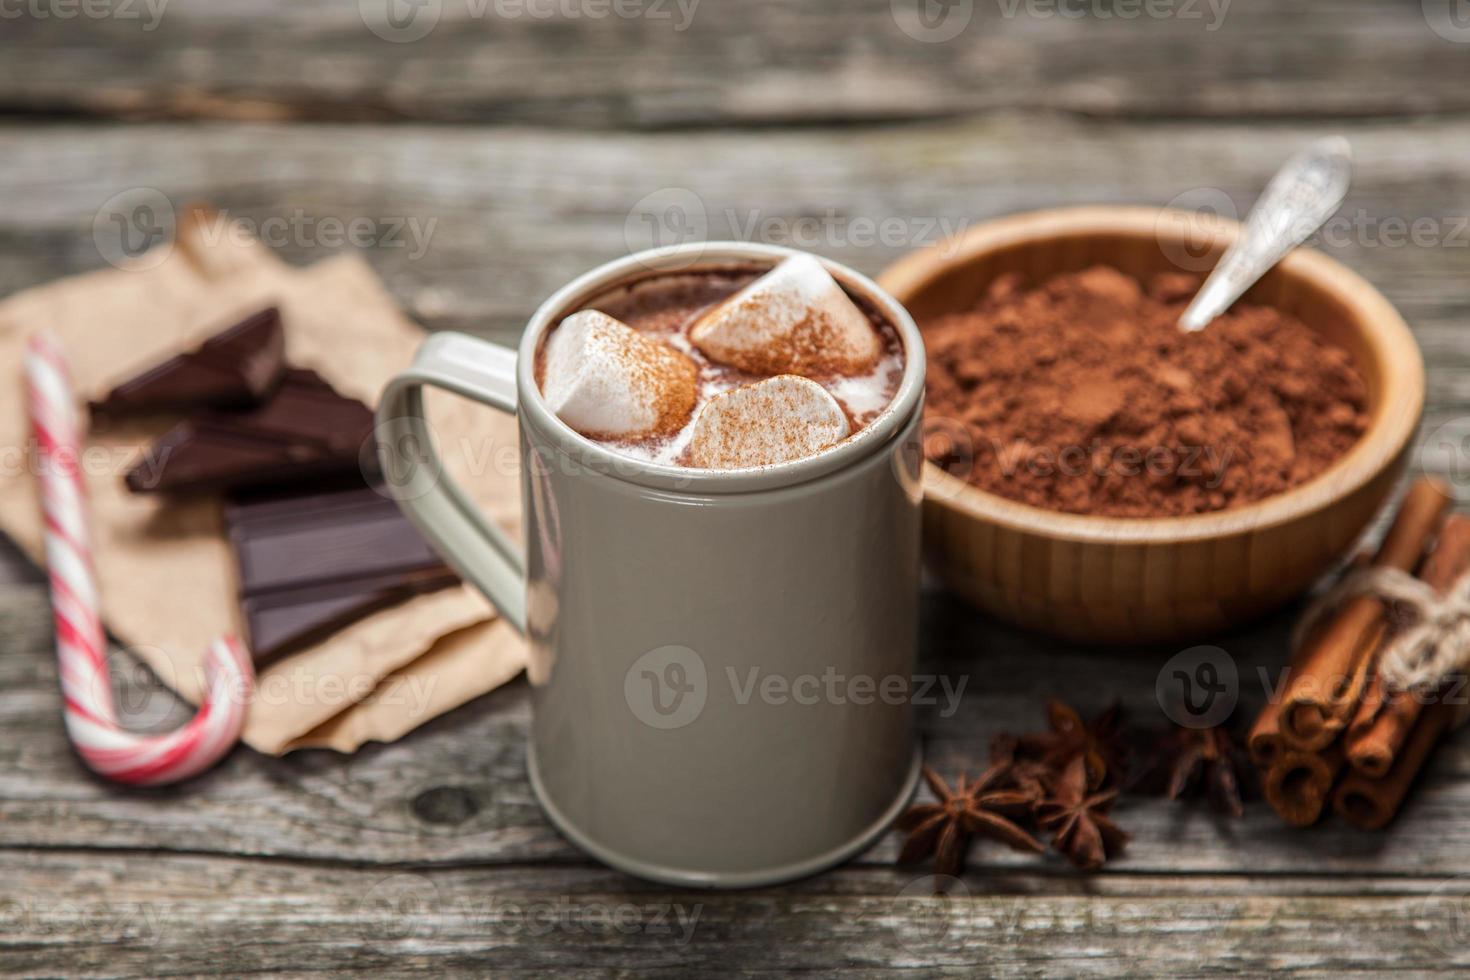 Cocoa drink with marshmallows photo